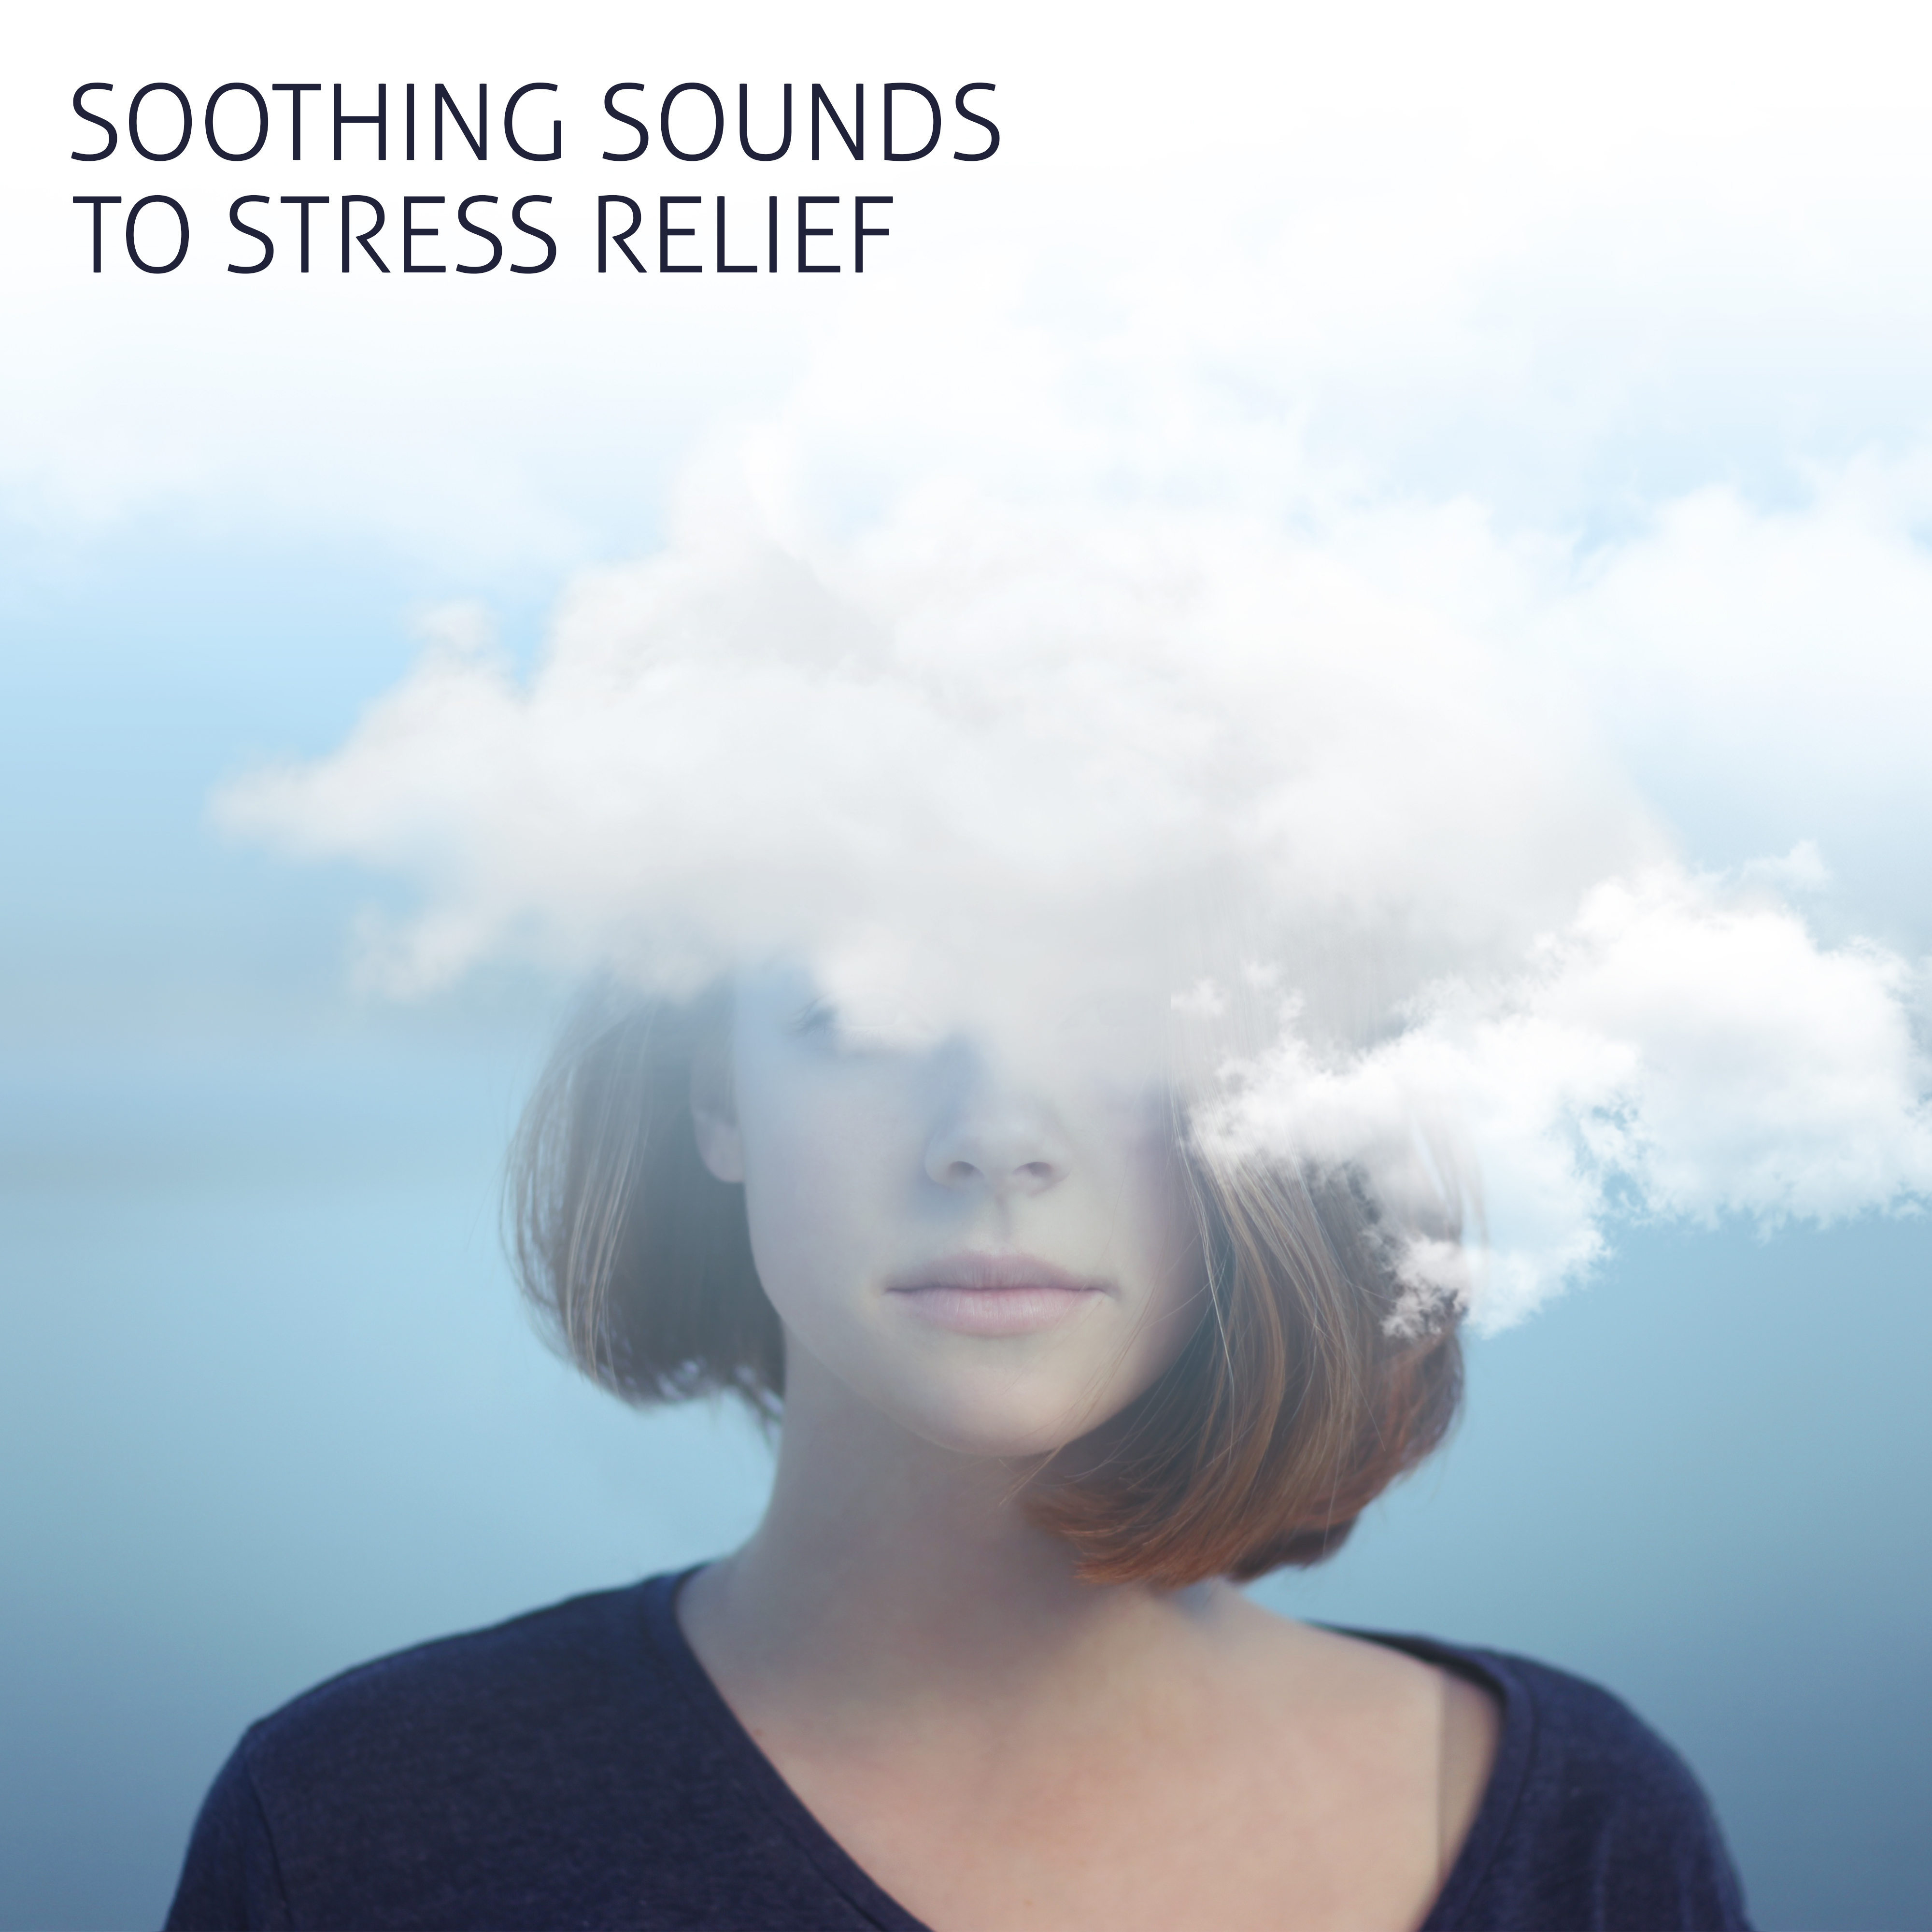 Soothing Sounds to Stress Relief  Calming New Age Sounds, Rest  Relax, Easy Listening, Relaxation Music